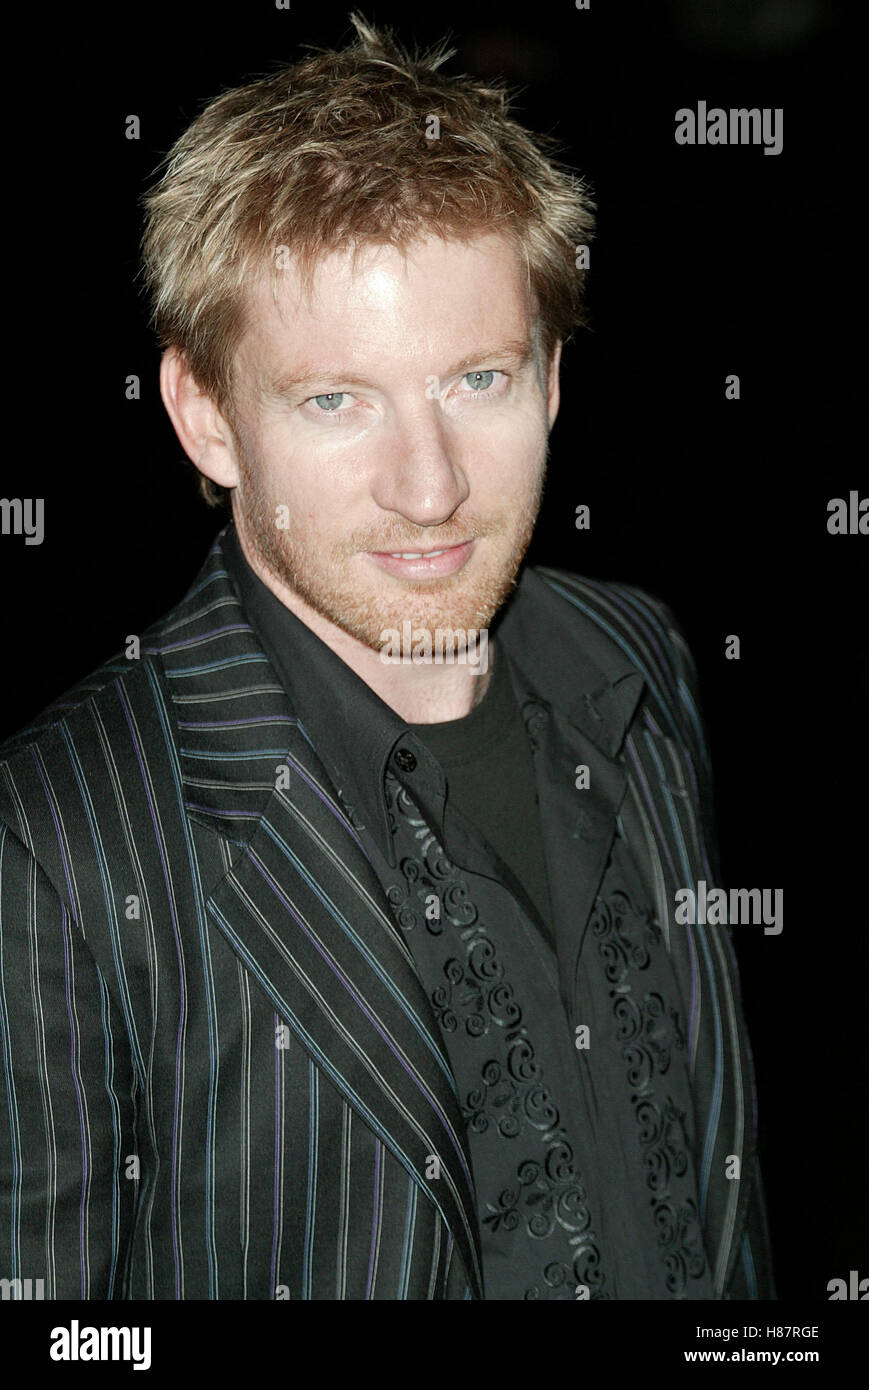 DAVID WENHAM LORD OF THE RINGS PREMIERE 200 ODEON LEICESTER SQUARE LONDON ENGLAND 11 December 2003 Stock Photo